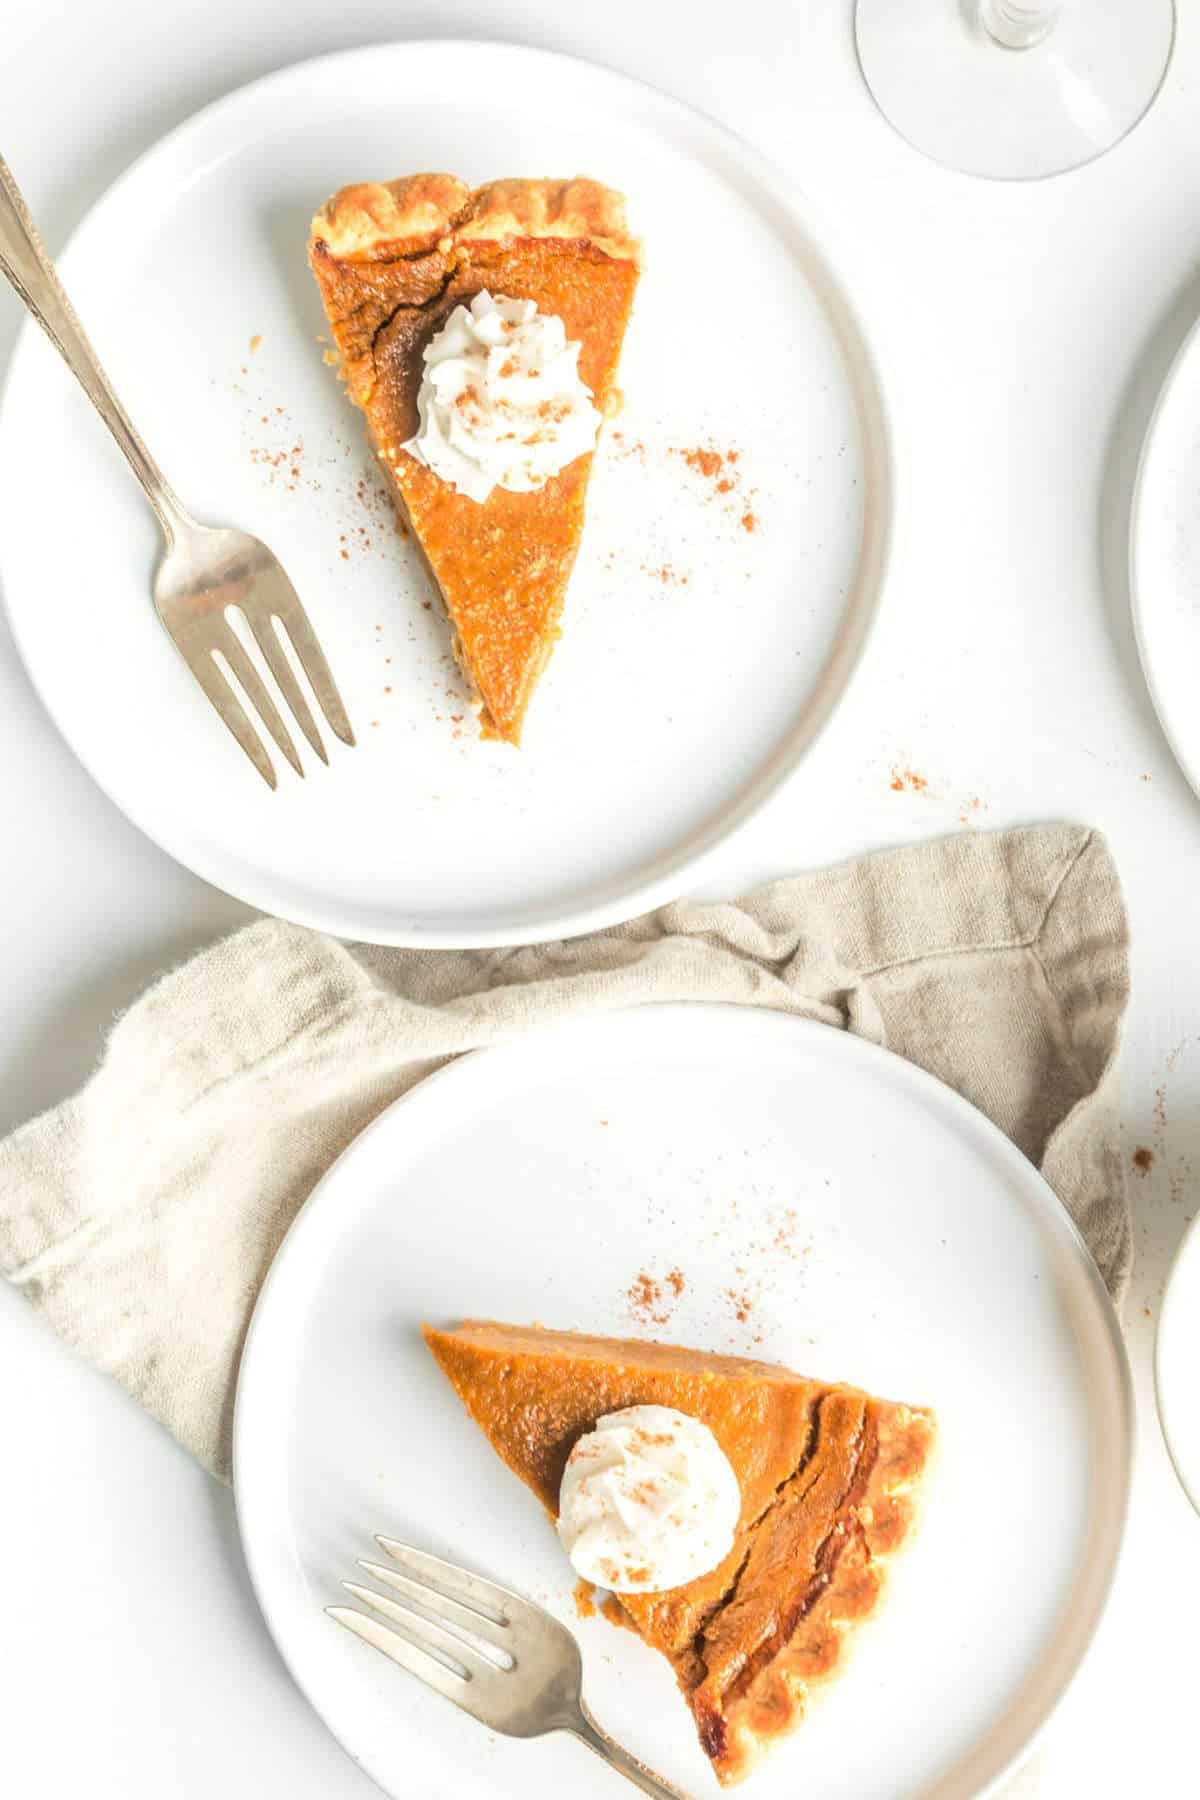 Two slices of vegan pumpkin pie on plates and served with vegan whipped cream.